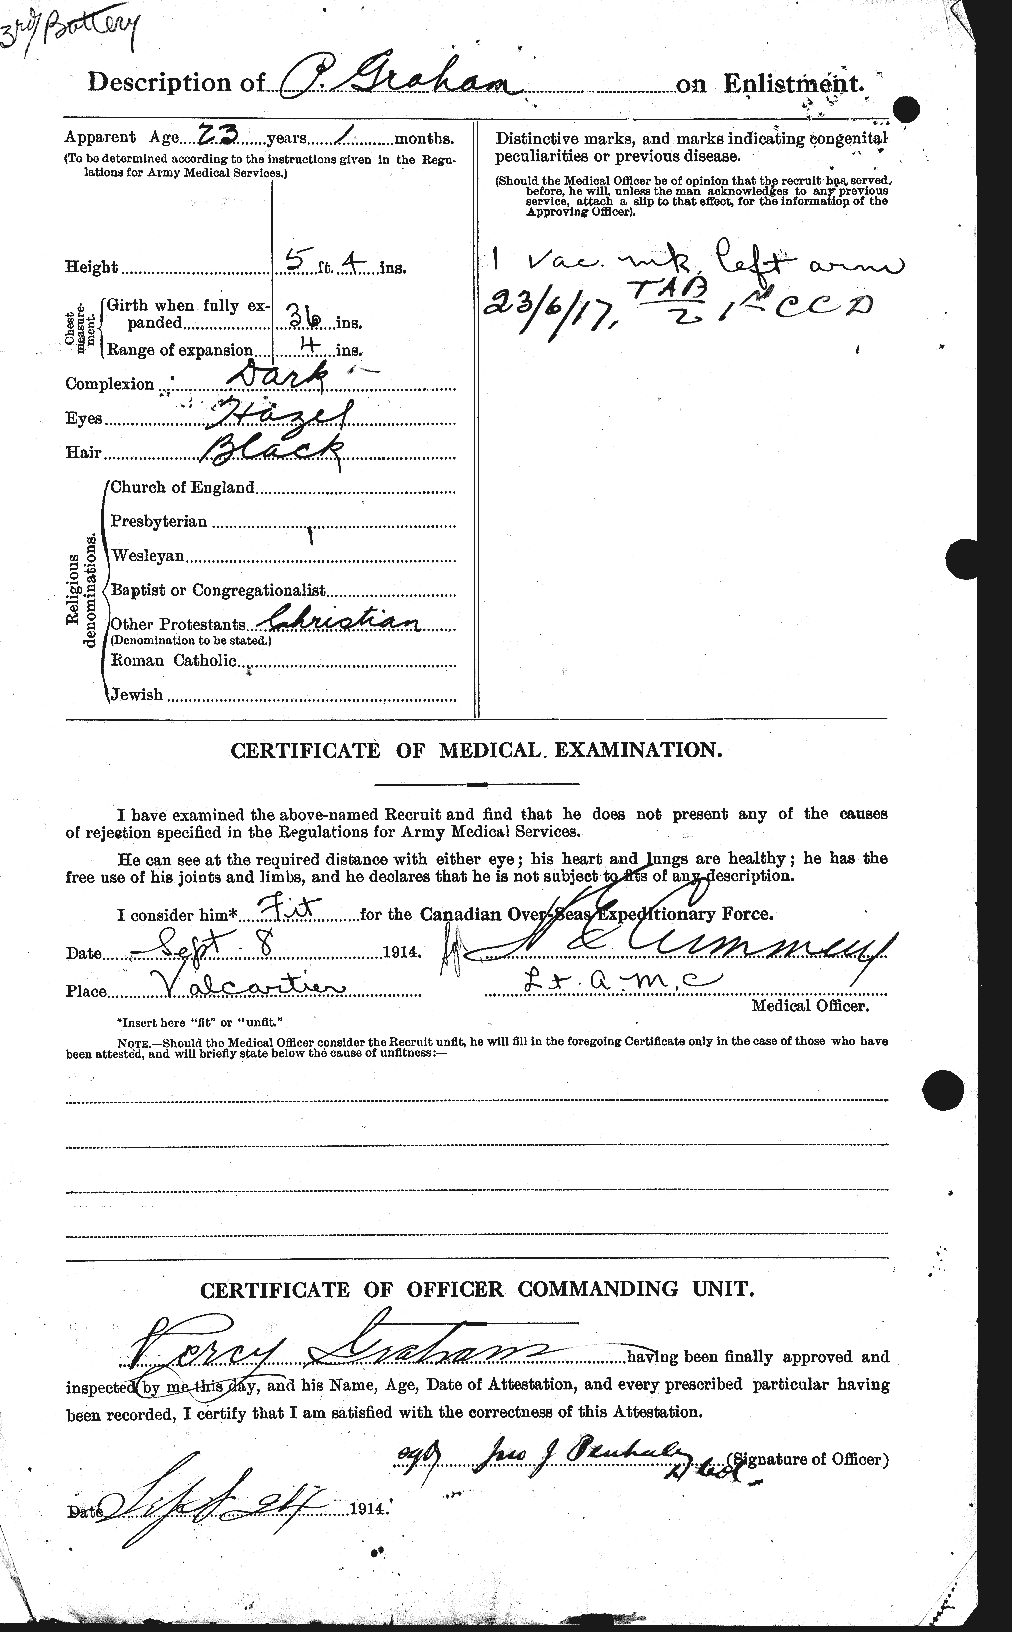 Personnel Records of the First World War - CEF 359339b